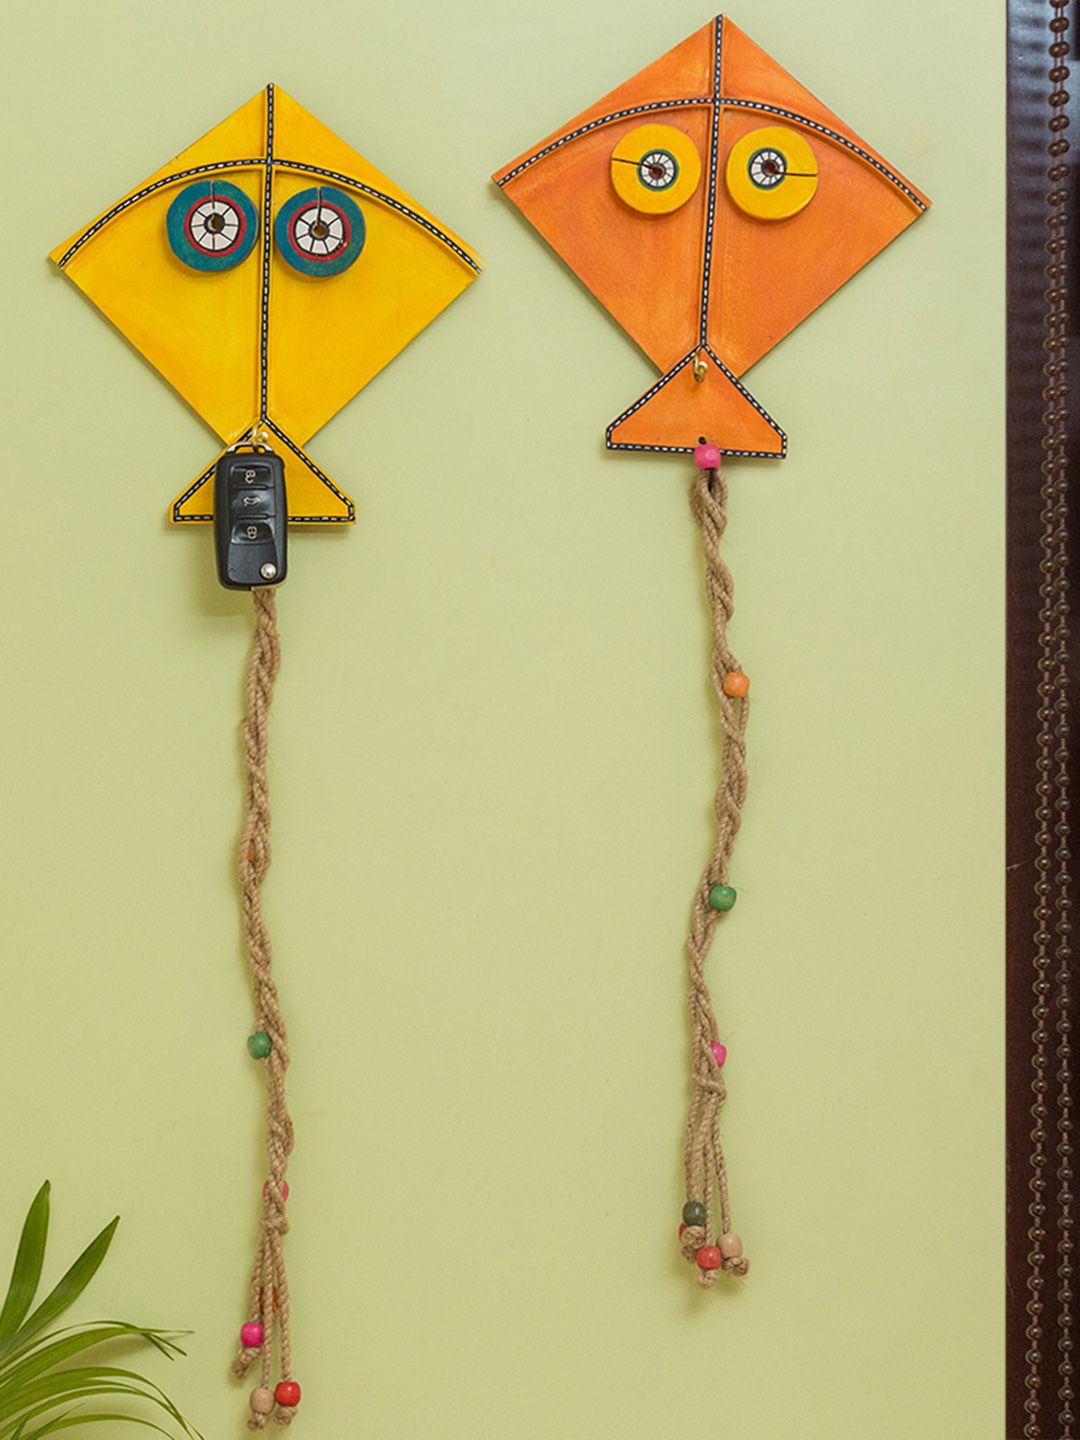 ExclusiveLane Set Of 2 Kite Pals Hand-Painted Wooden Wall Decor Price in India